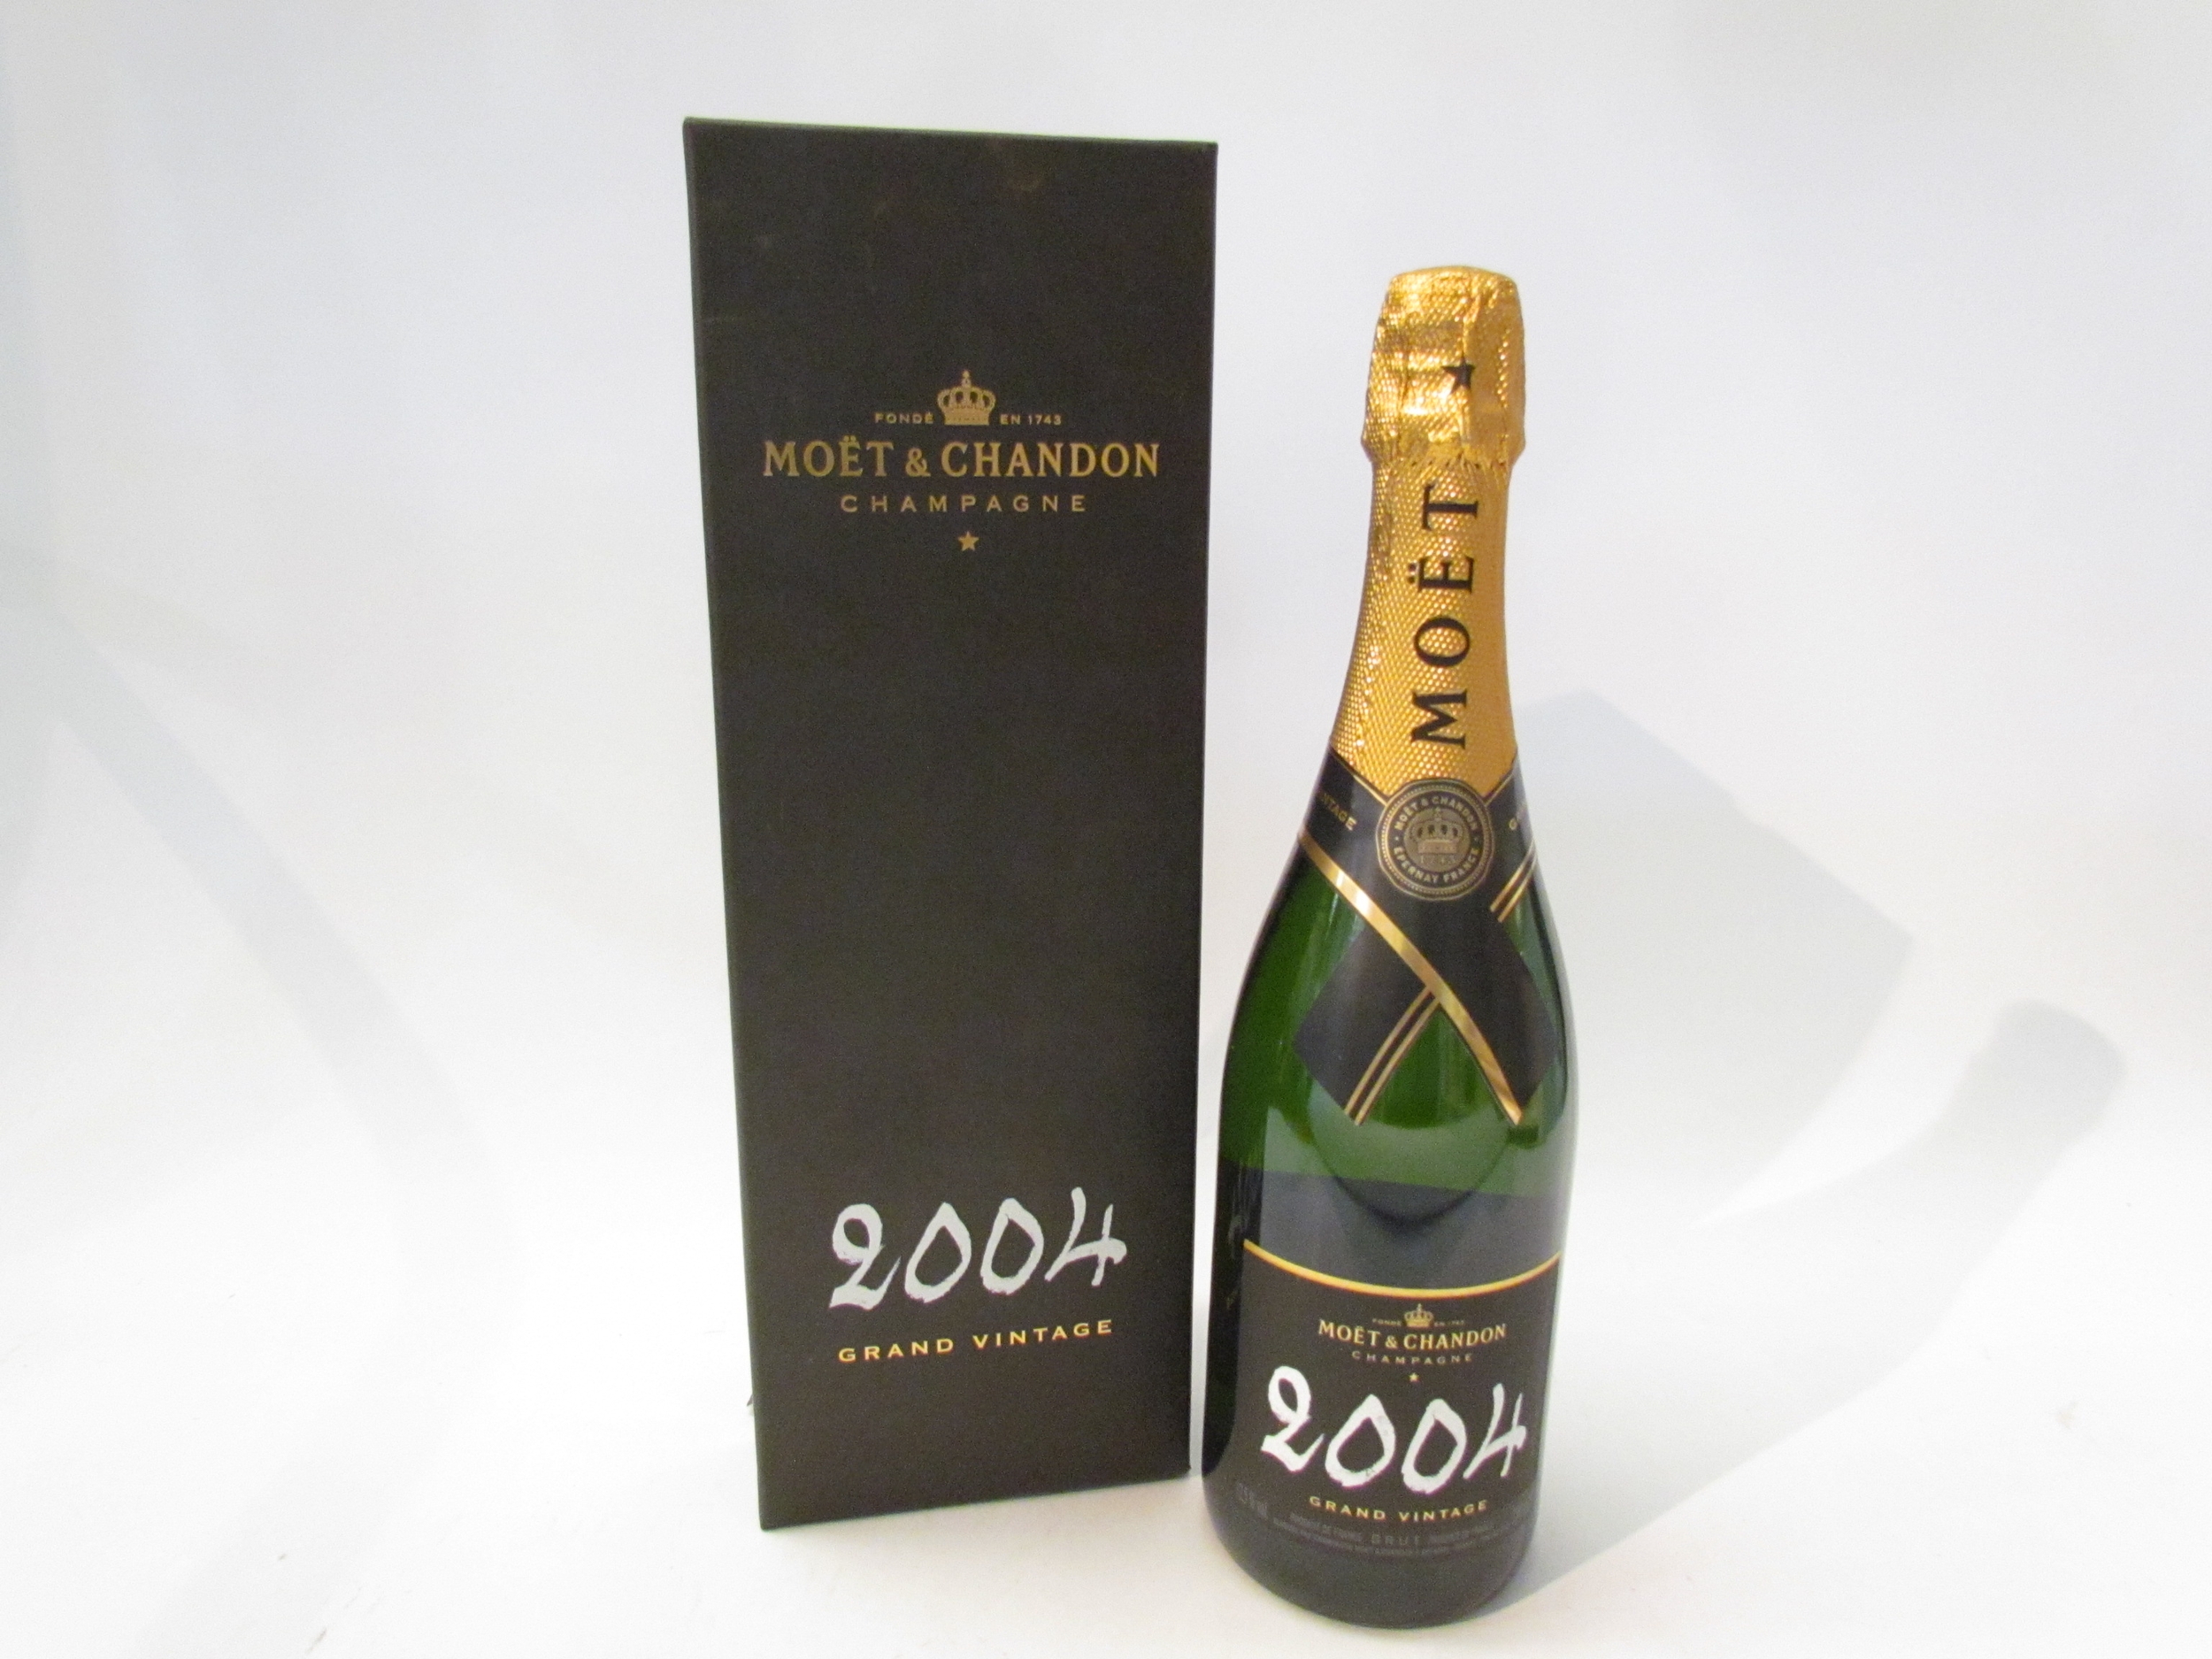 2004 Grand Vintage Moet and Chandon Champagne, boxed